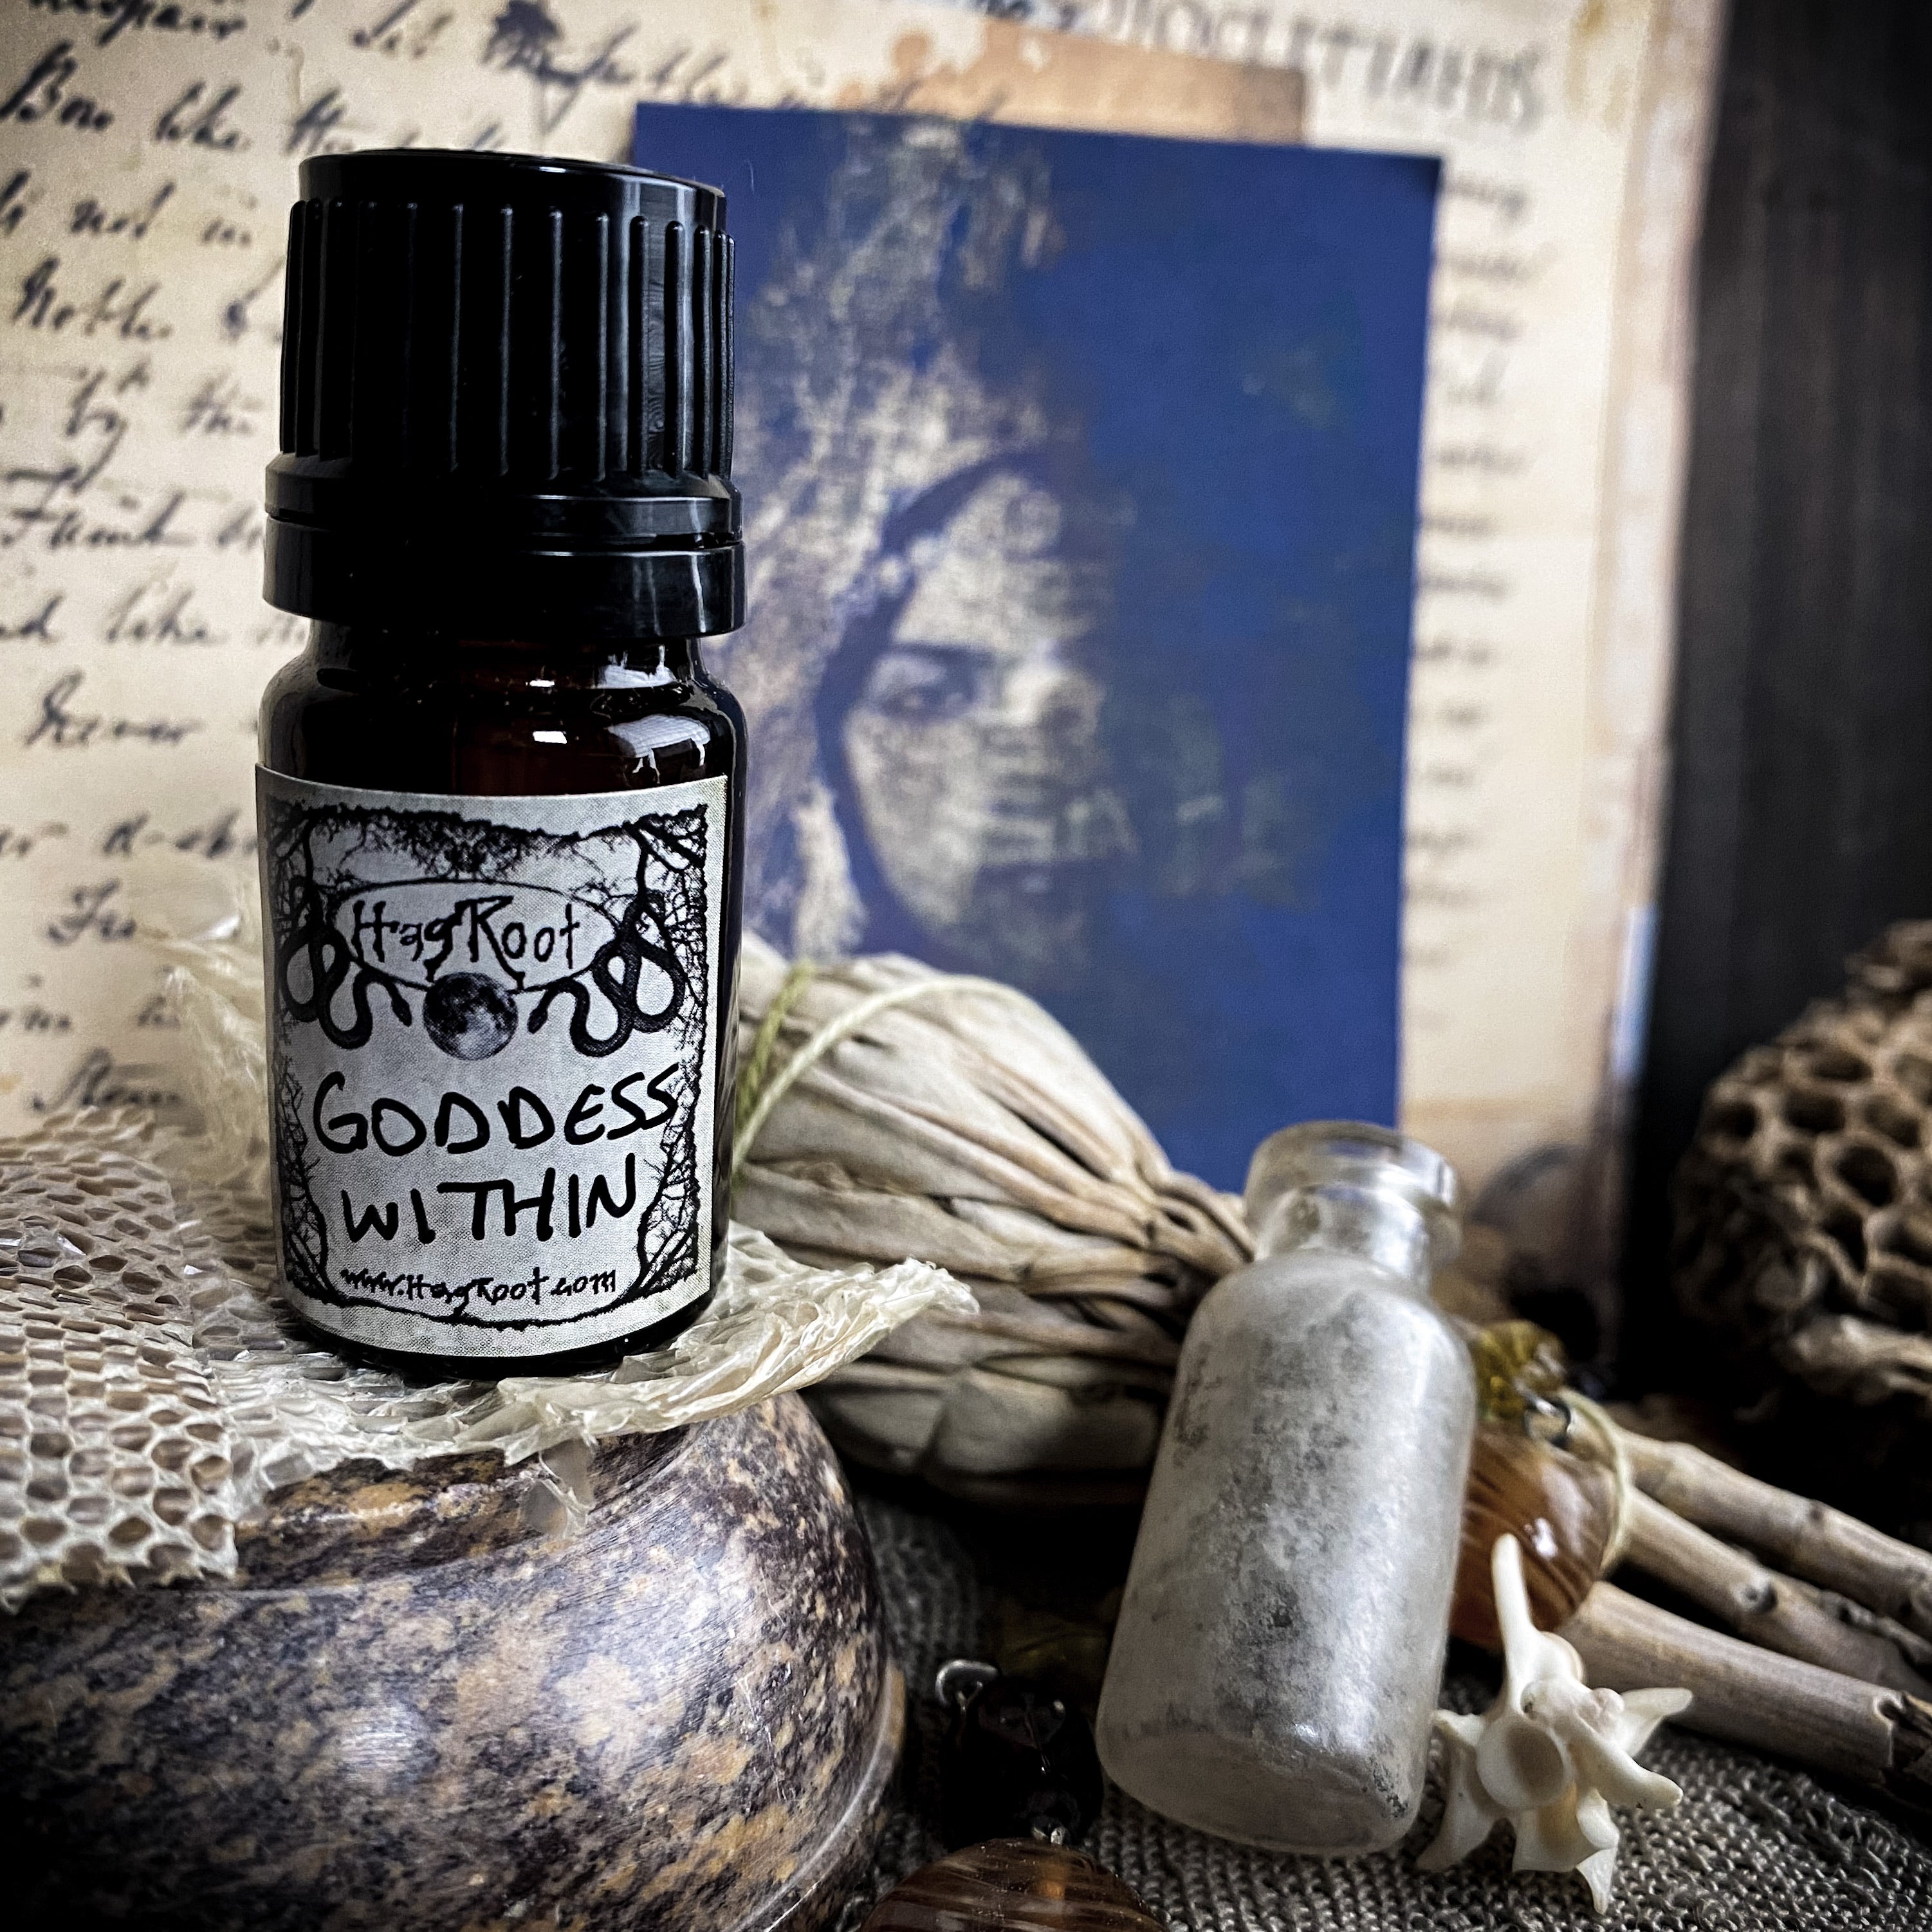 GODDESS WITHIN-(Patchouli, Bergamot, Clove, Lavender)-Perfume, Anointing,  Ritual Oil for Confidence, Strength, Motivation, Clarity, Balance and